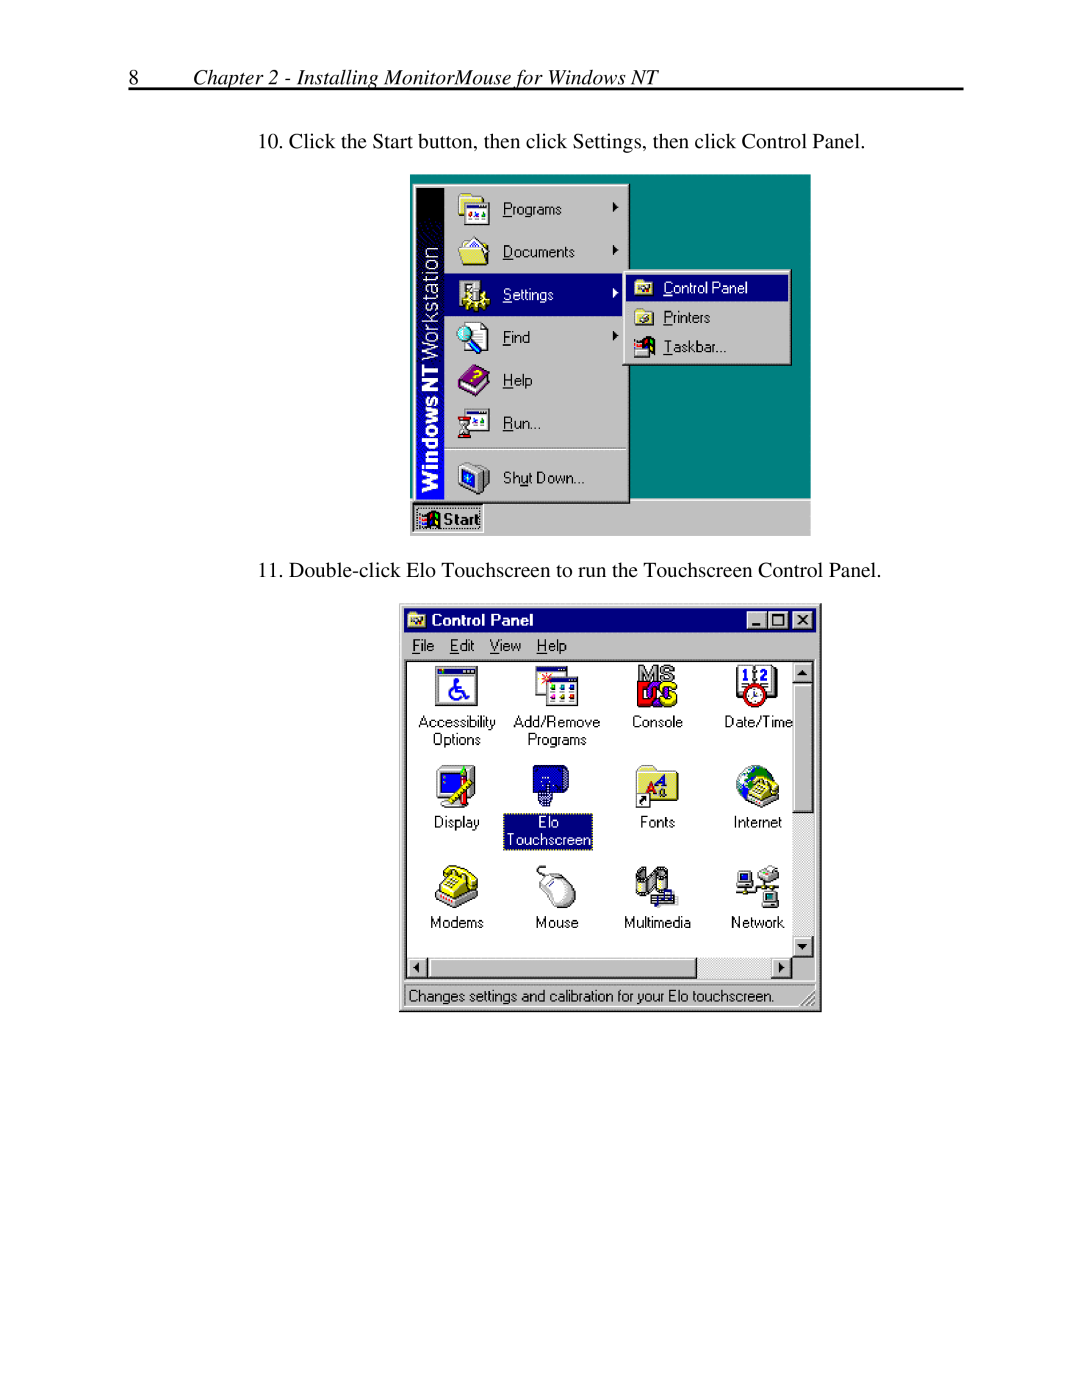 Elo TouchSystems MonitorMouse FOR WINDOWS NT Version 2.0 manual Installing MonitorMouse for Windows NT 